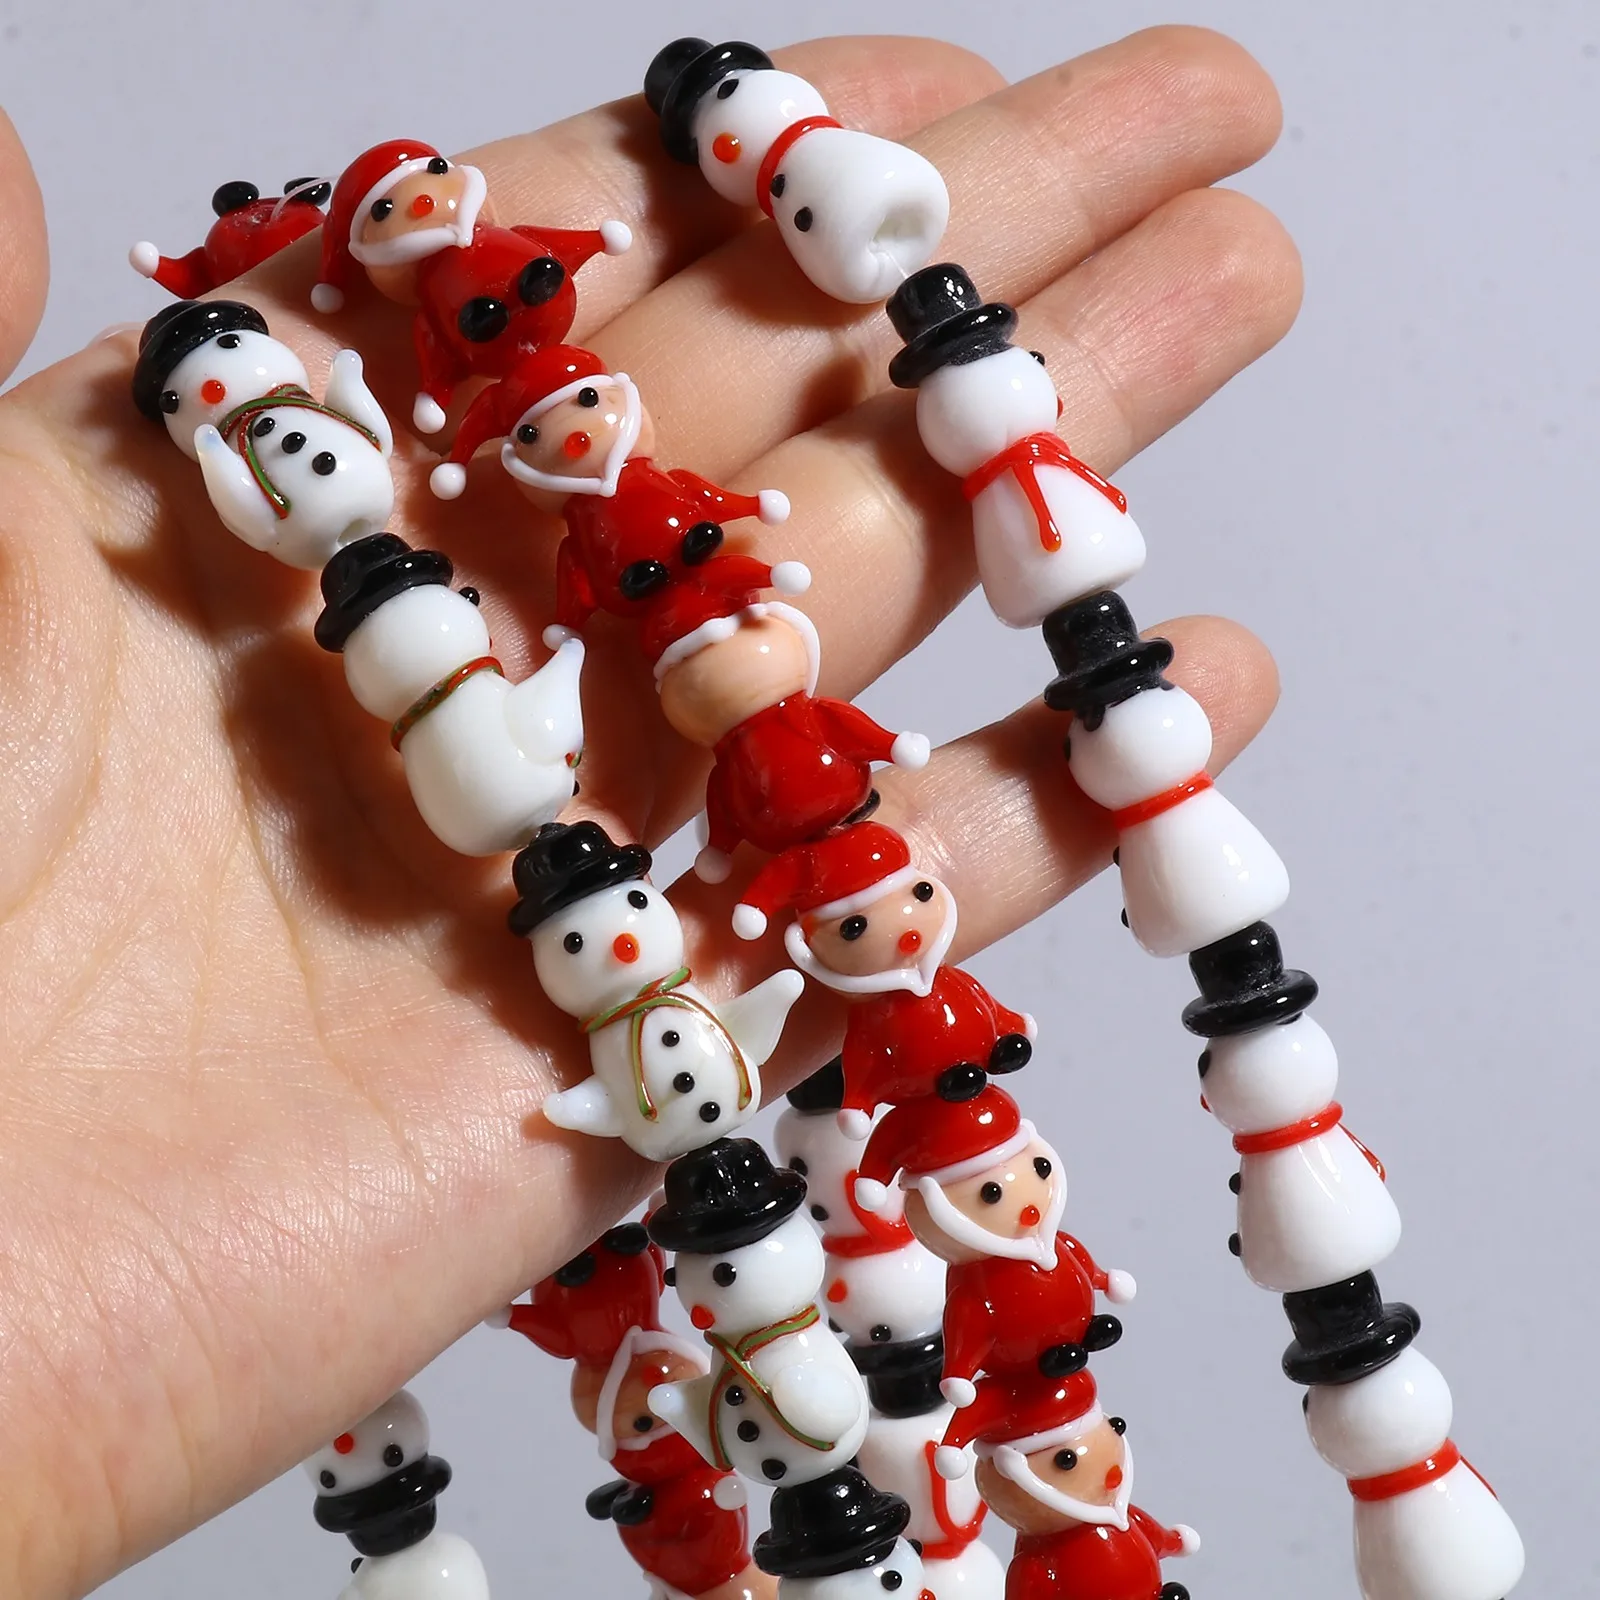 

2PCs Lampwork Glass Beads Christmas Snowman Santa Claus Red Black White Loose Spacer Beads For Women DIY Making Necklace Jewelry